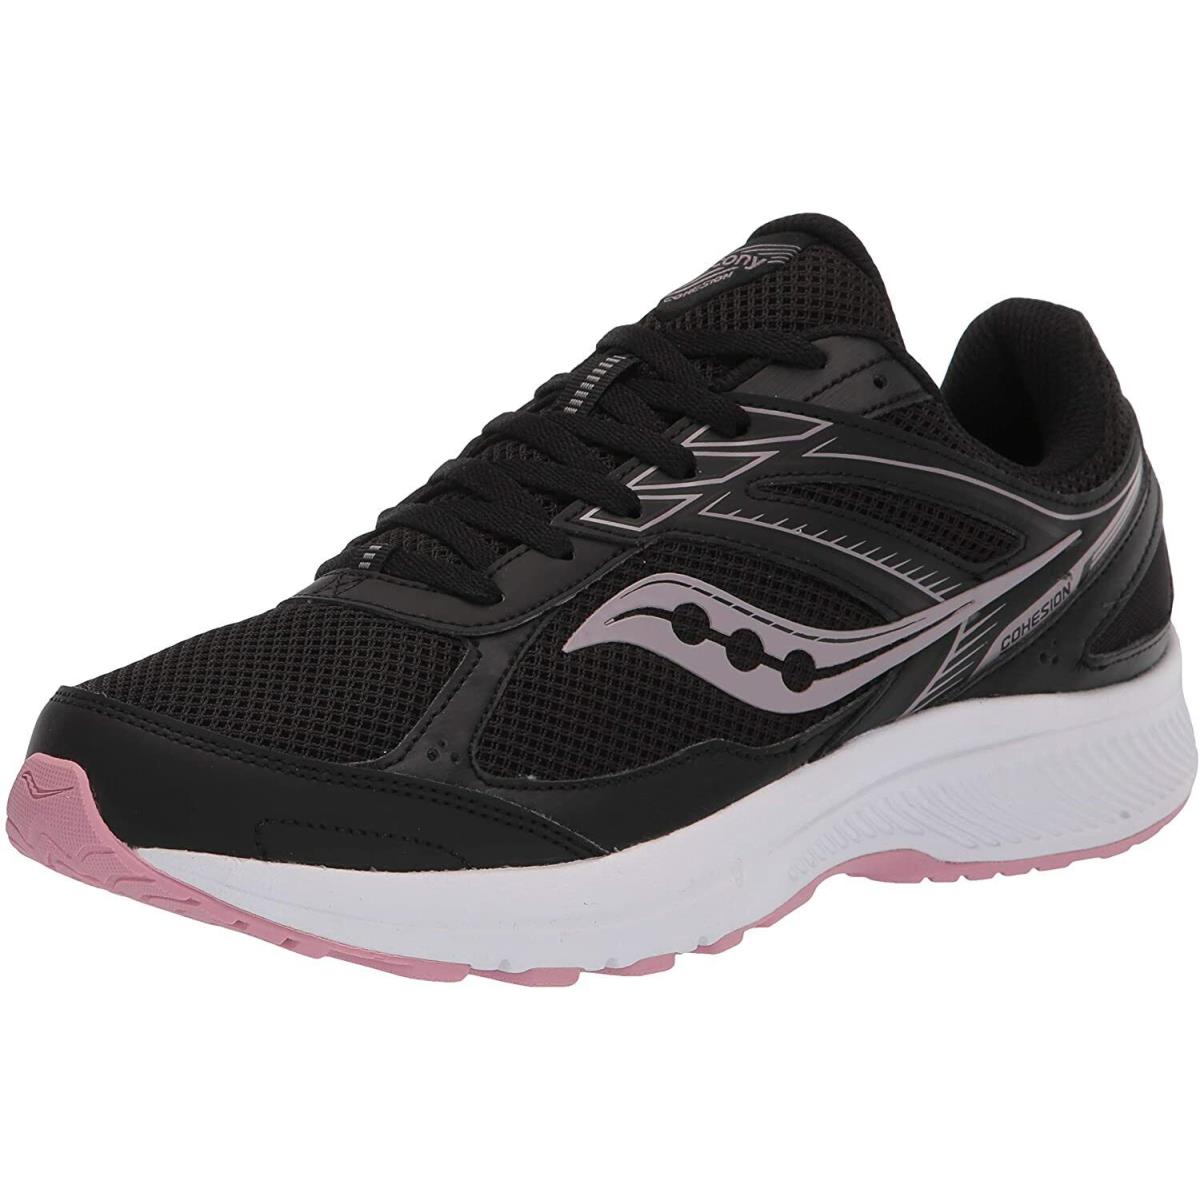 Saucony Women`s Cohesion 14 Road Running Shoe Black/Pink